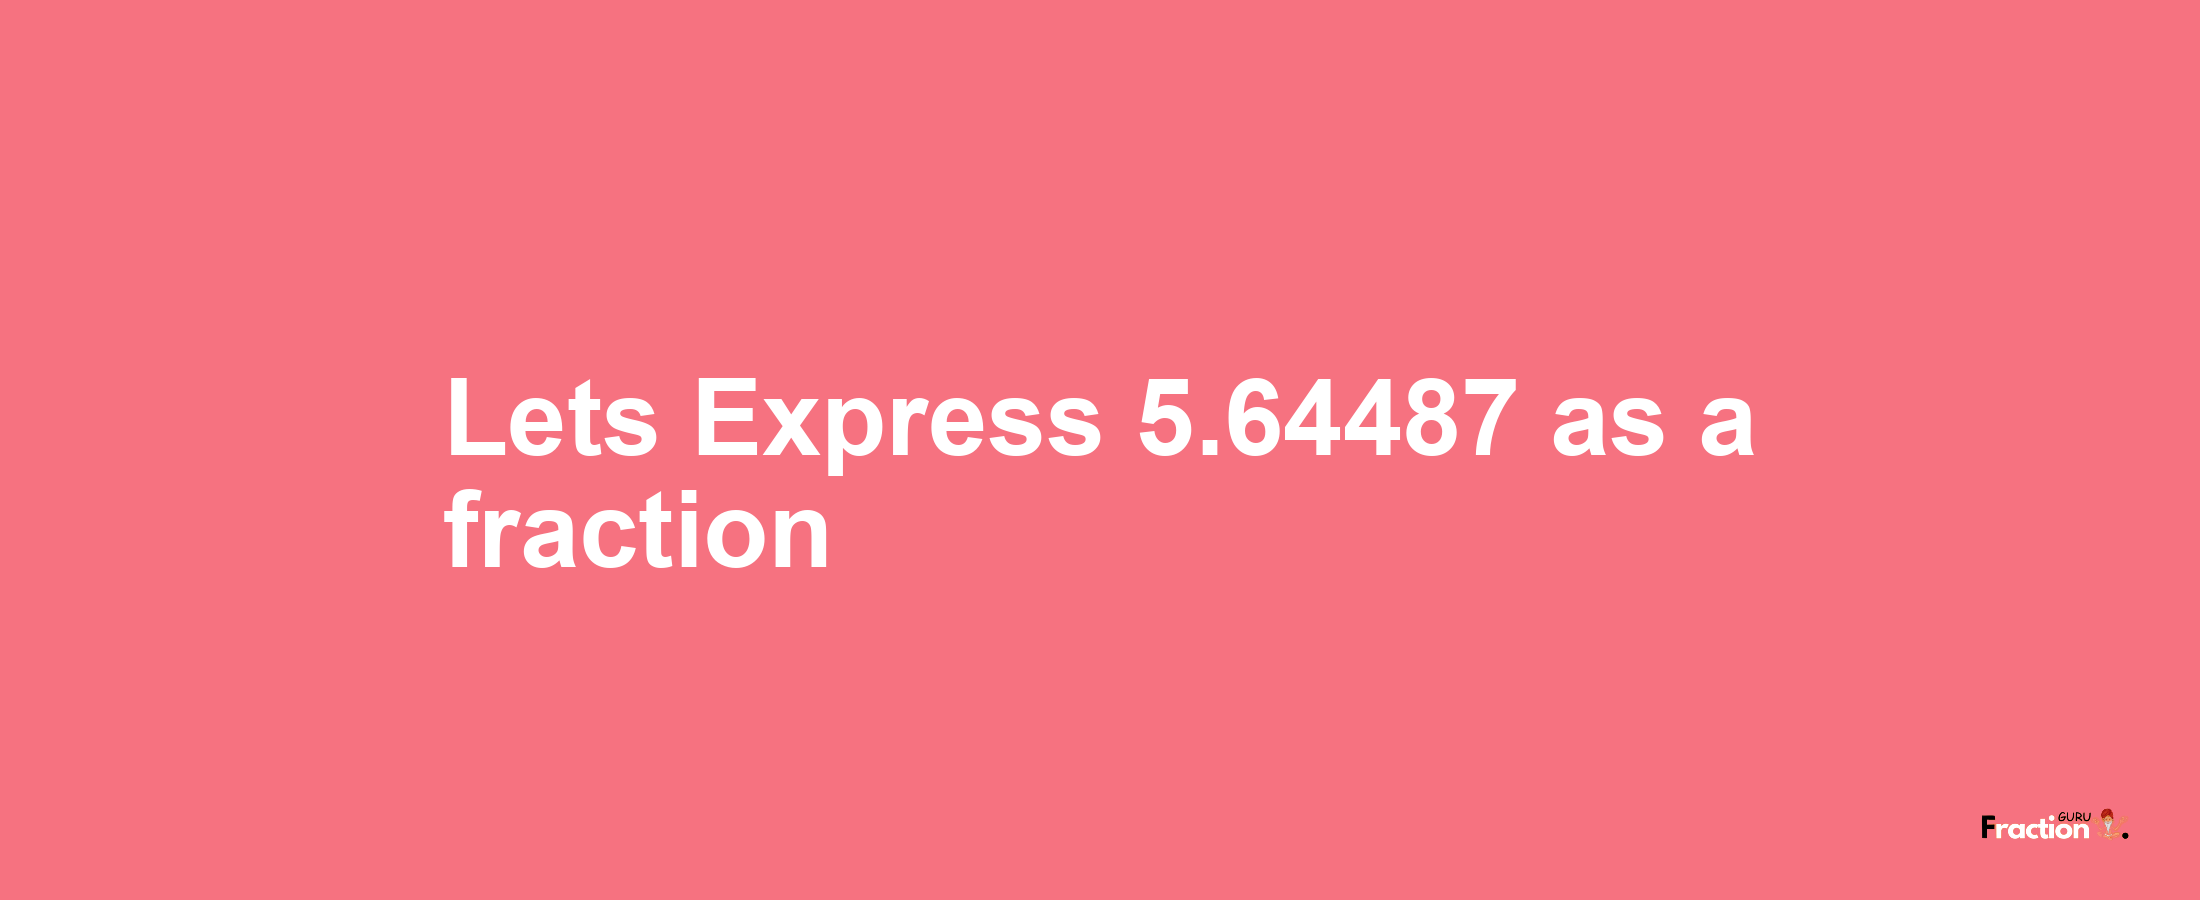 Lets Express 5.64487 as afraction